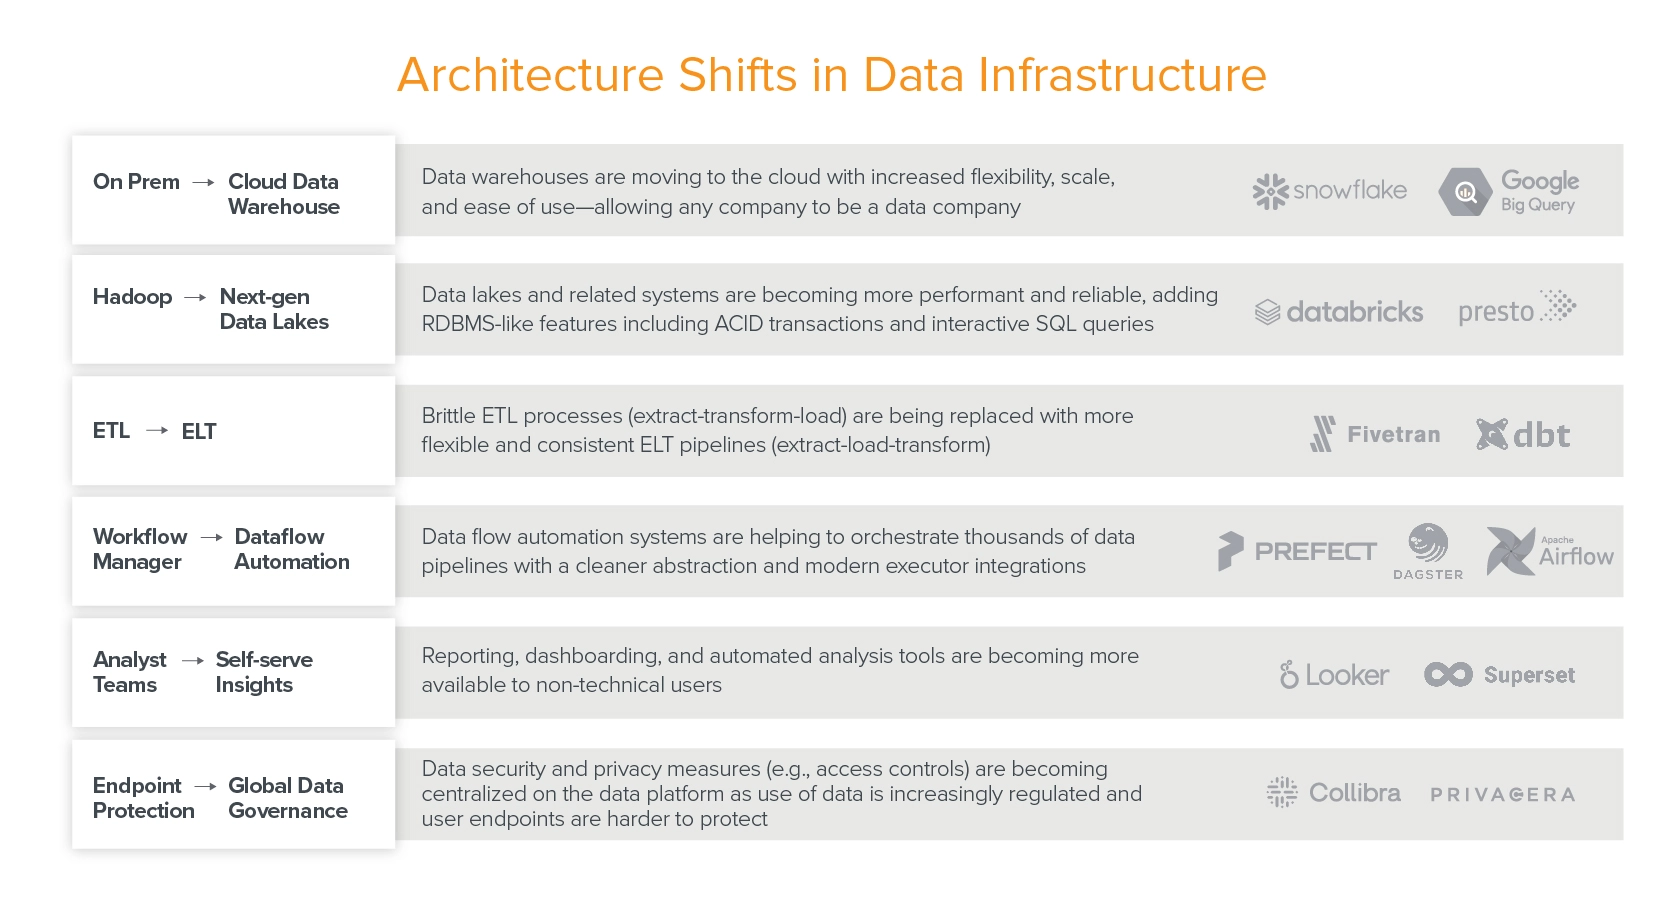 Architecture Shifts in Data Infrastructure